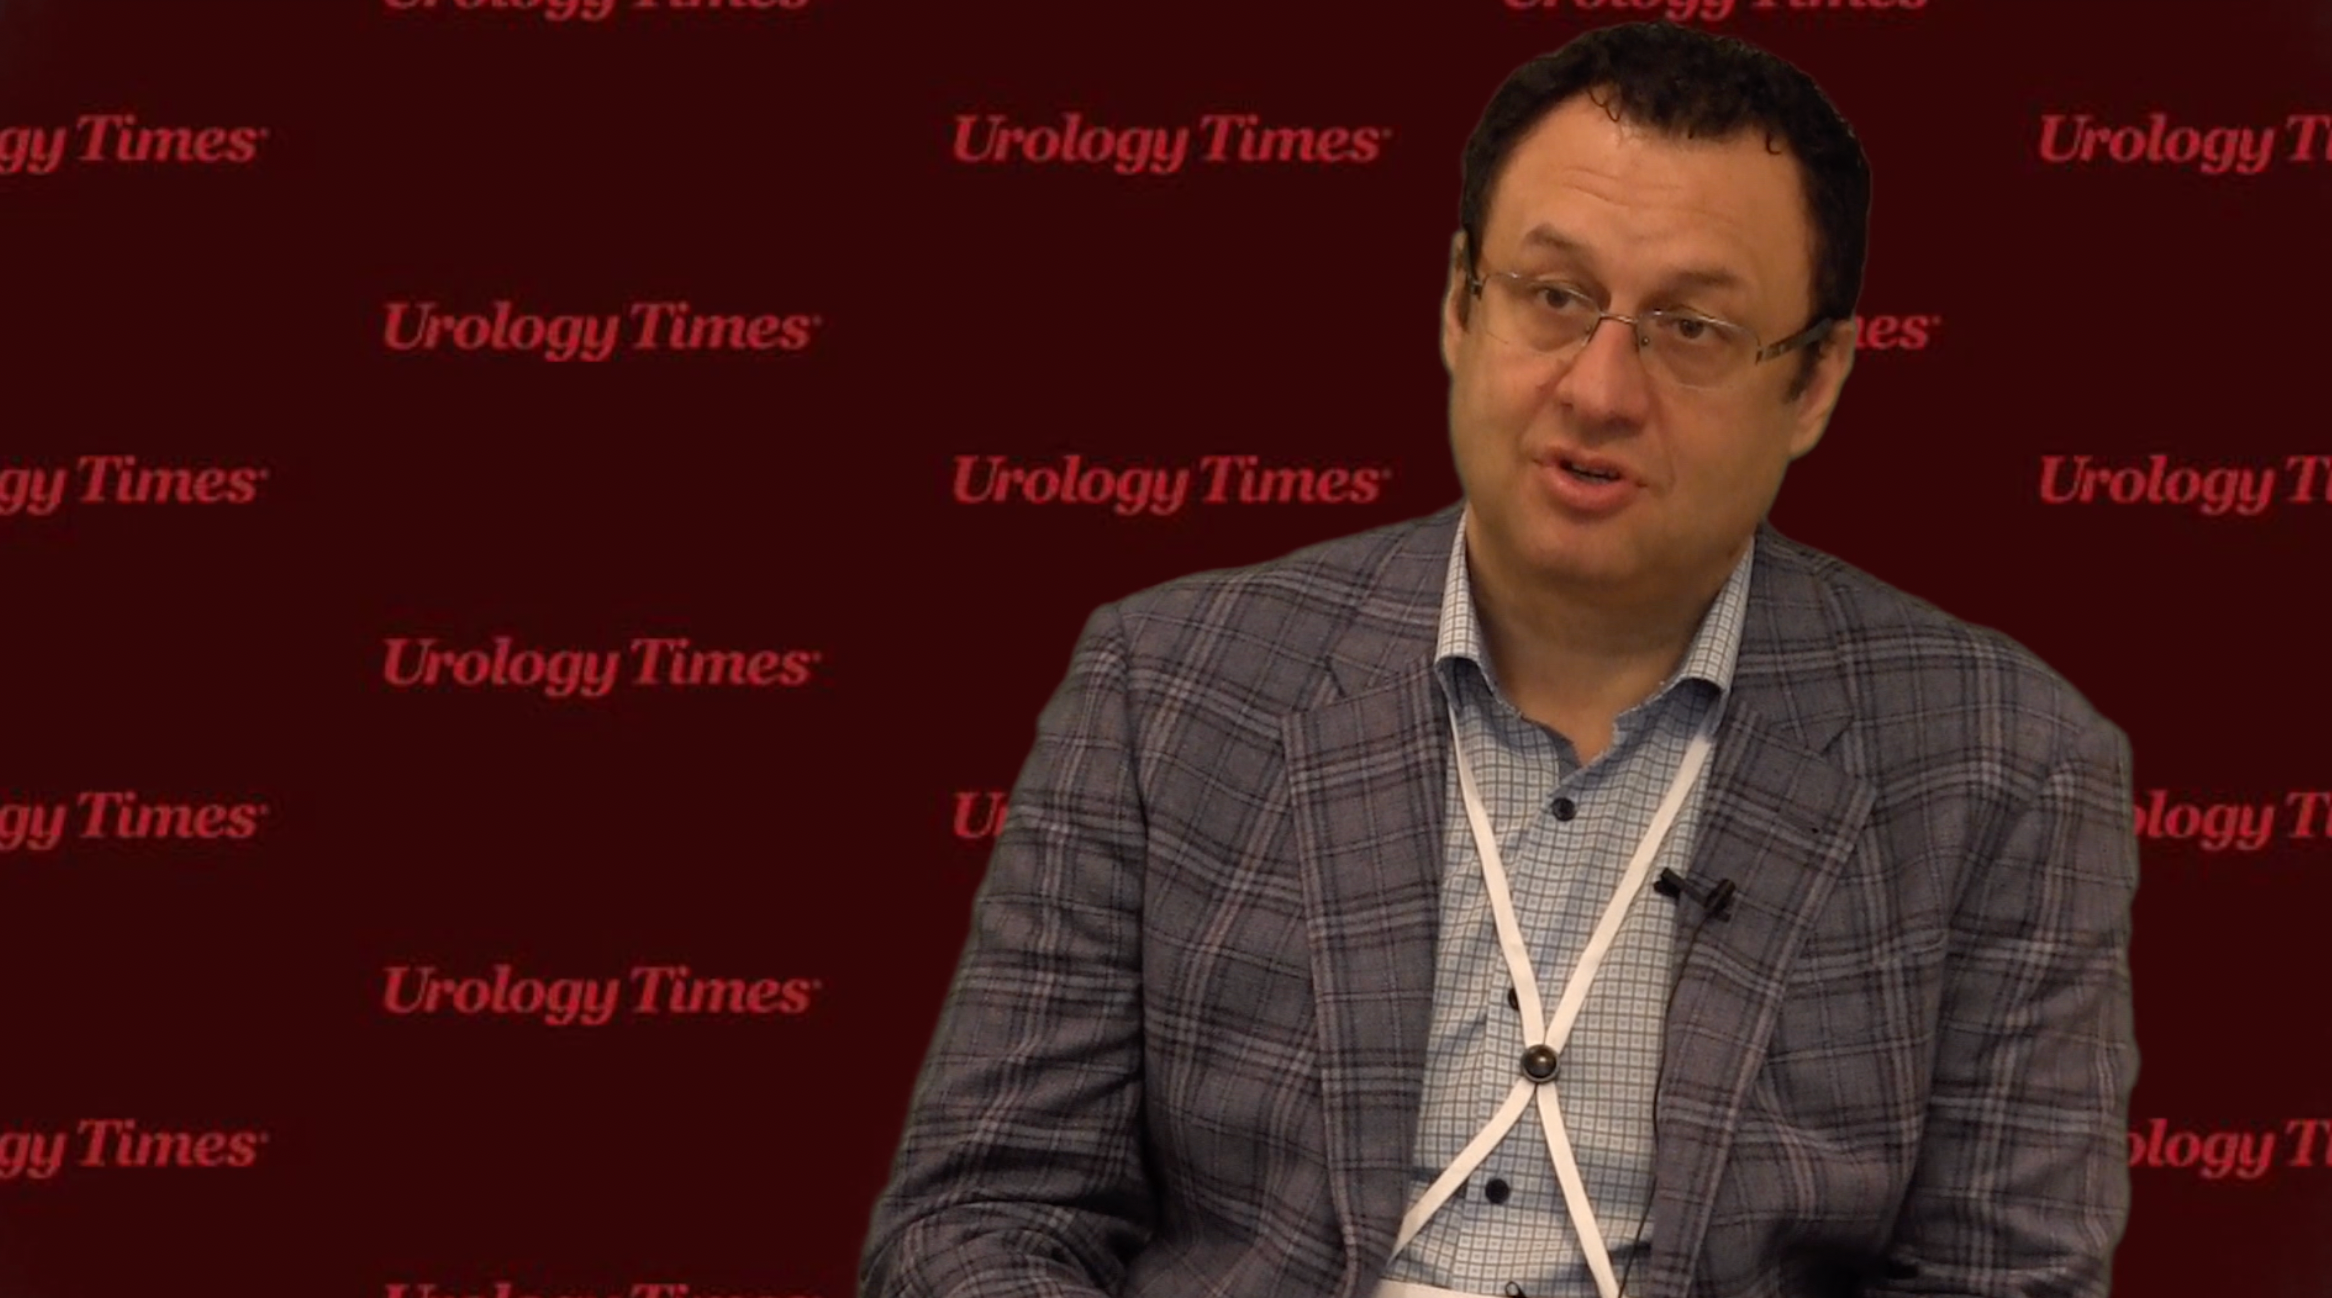 Dr. Bratslavsky discusses emerging research in renal cell carcinoma